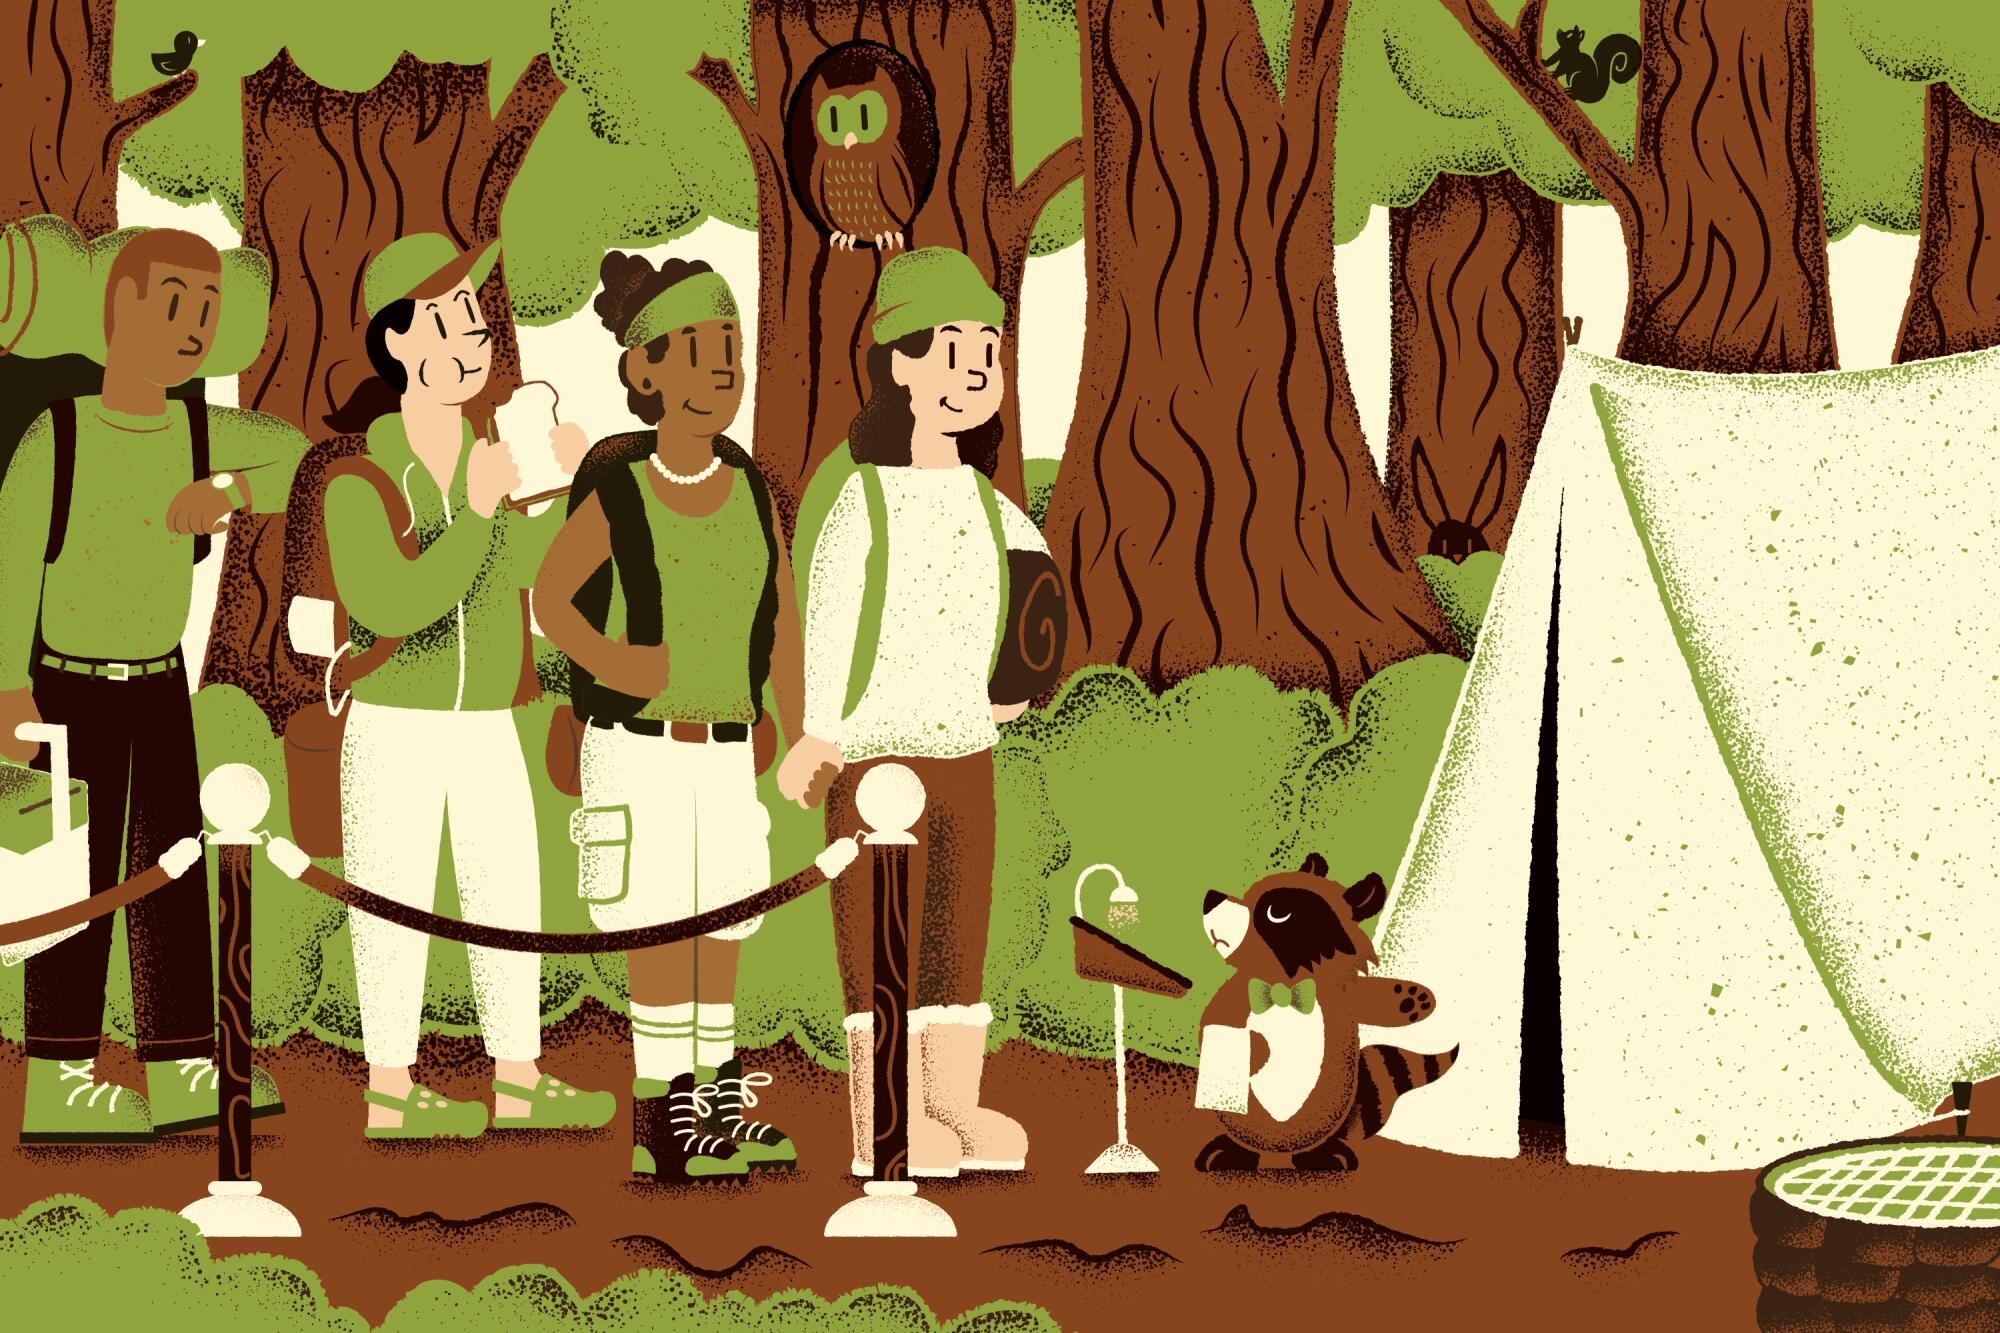 Cartoon illustration of a line of campers waiting in for a camp site, standing next to a tent and a raccoon pointing at it